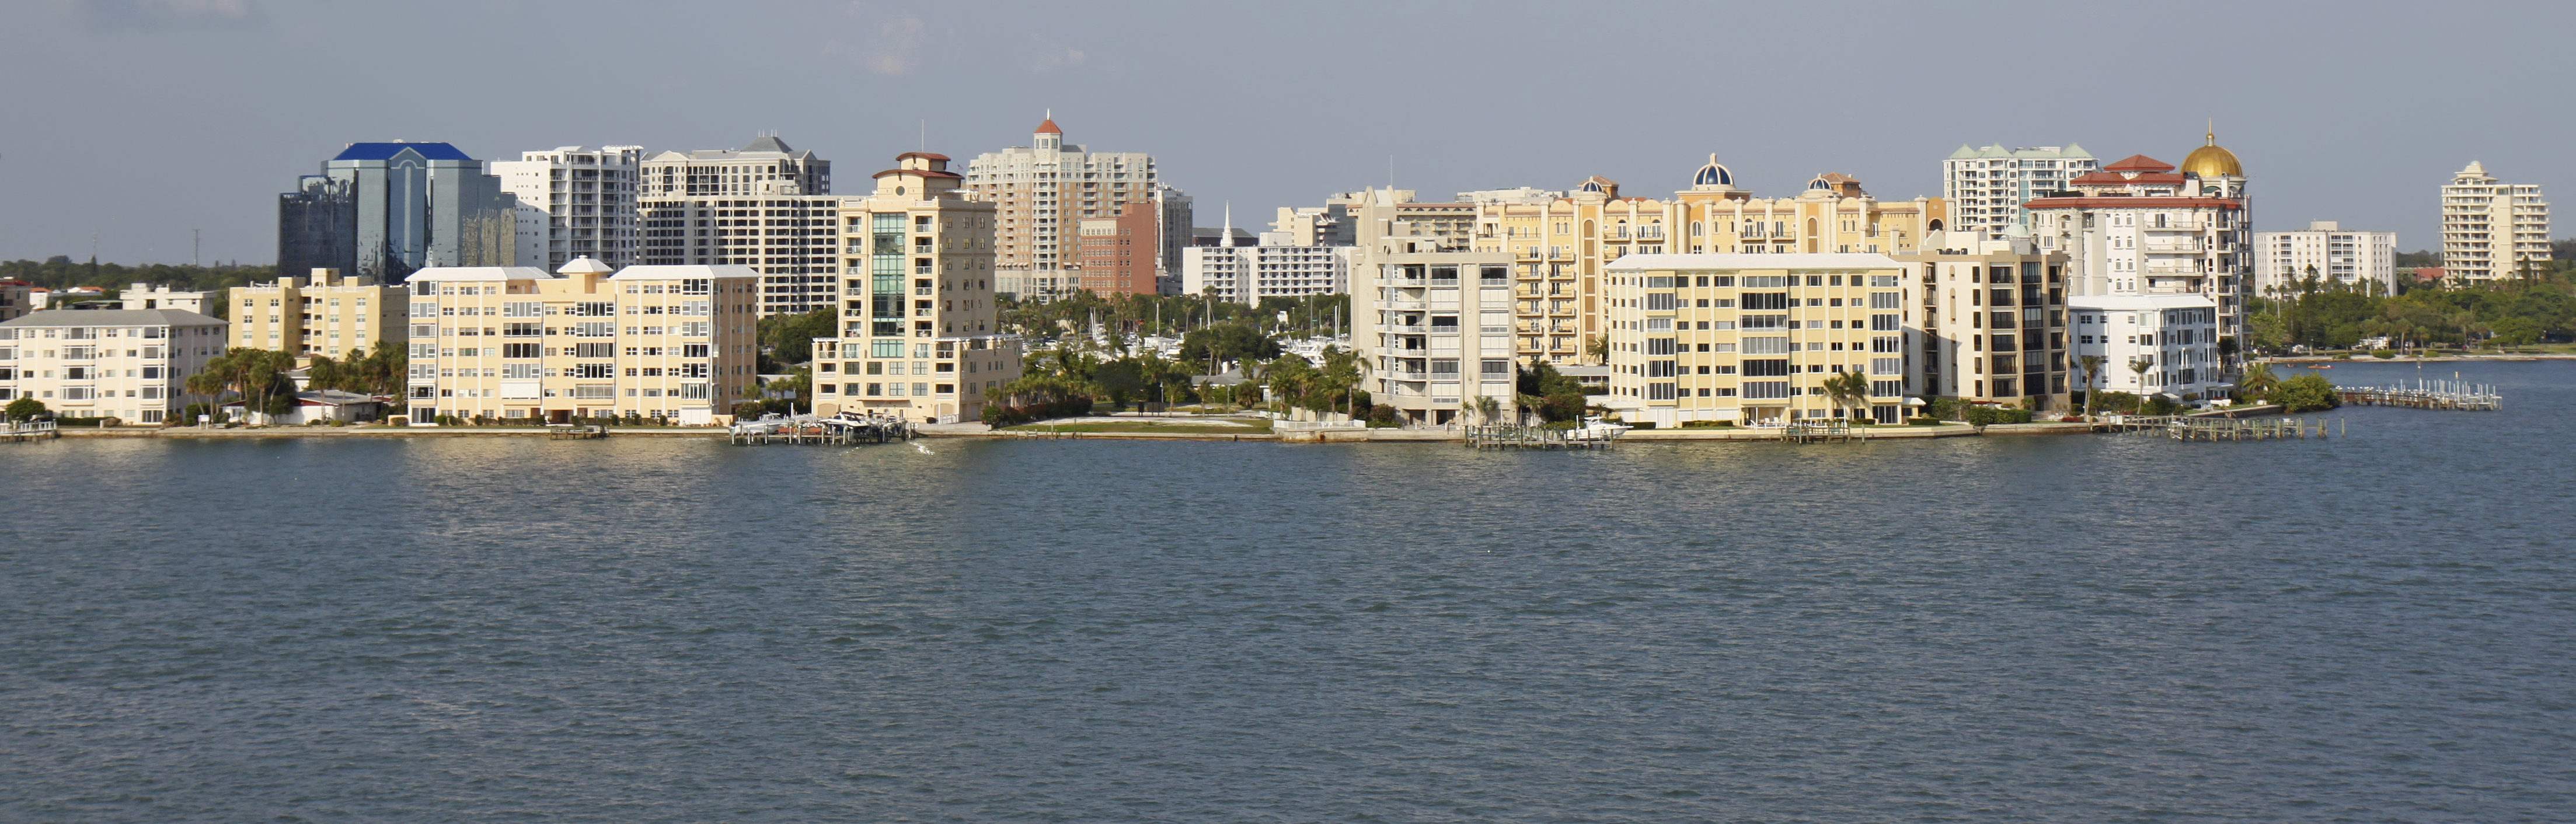  Skyline  of Sarasota  Florida viewed from above the water 